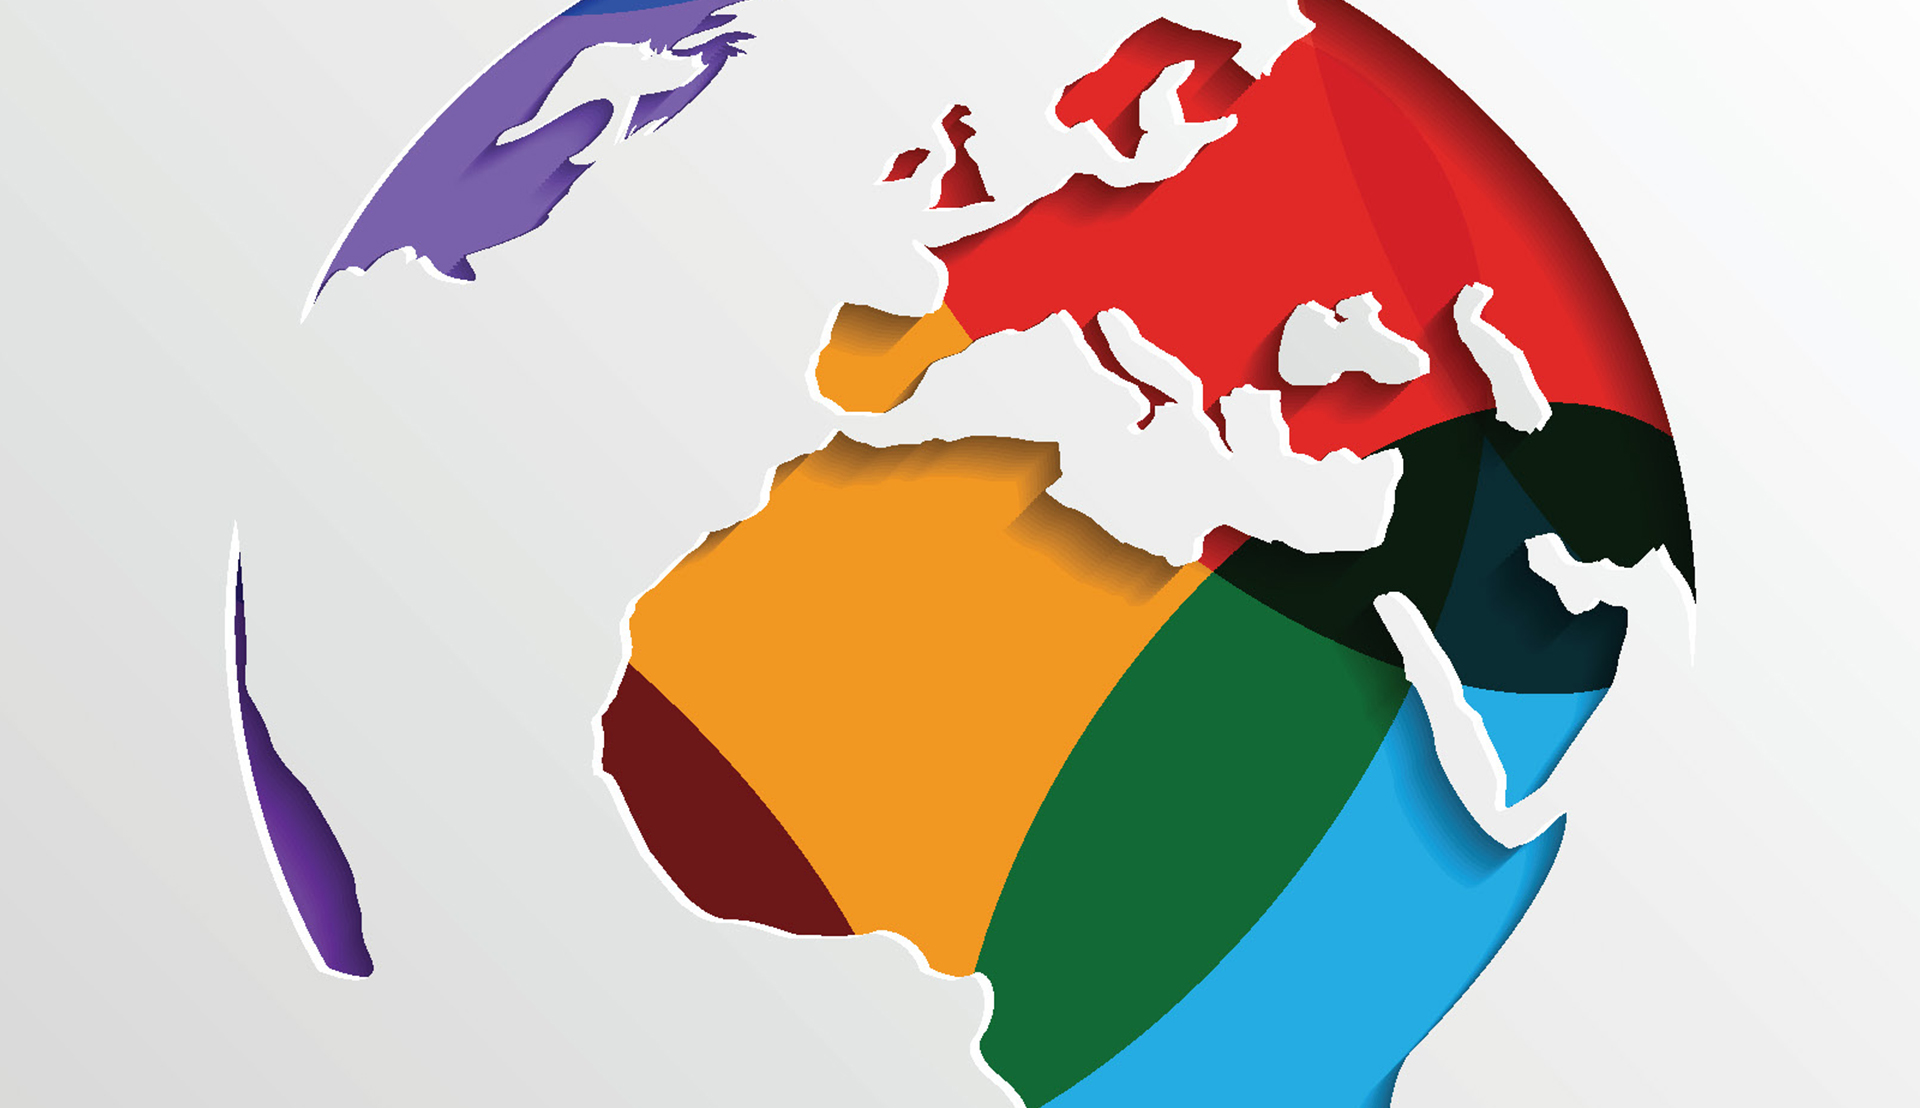 Rutgers Global - Rutgers Global Expo, September 28, 2017, graphic world map with rainbow colors underneath 